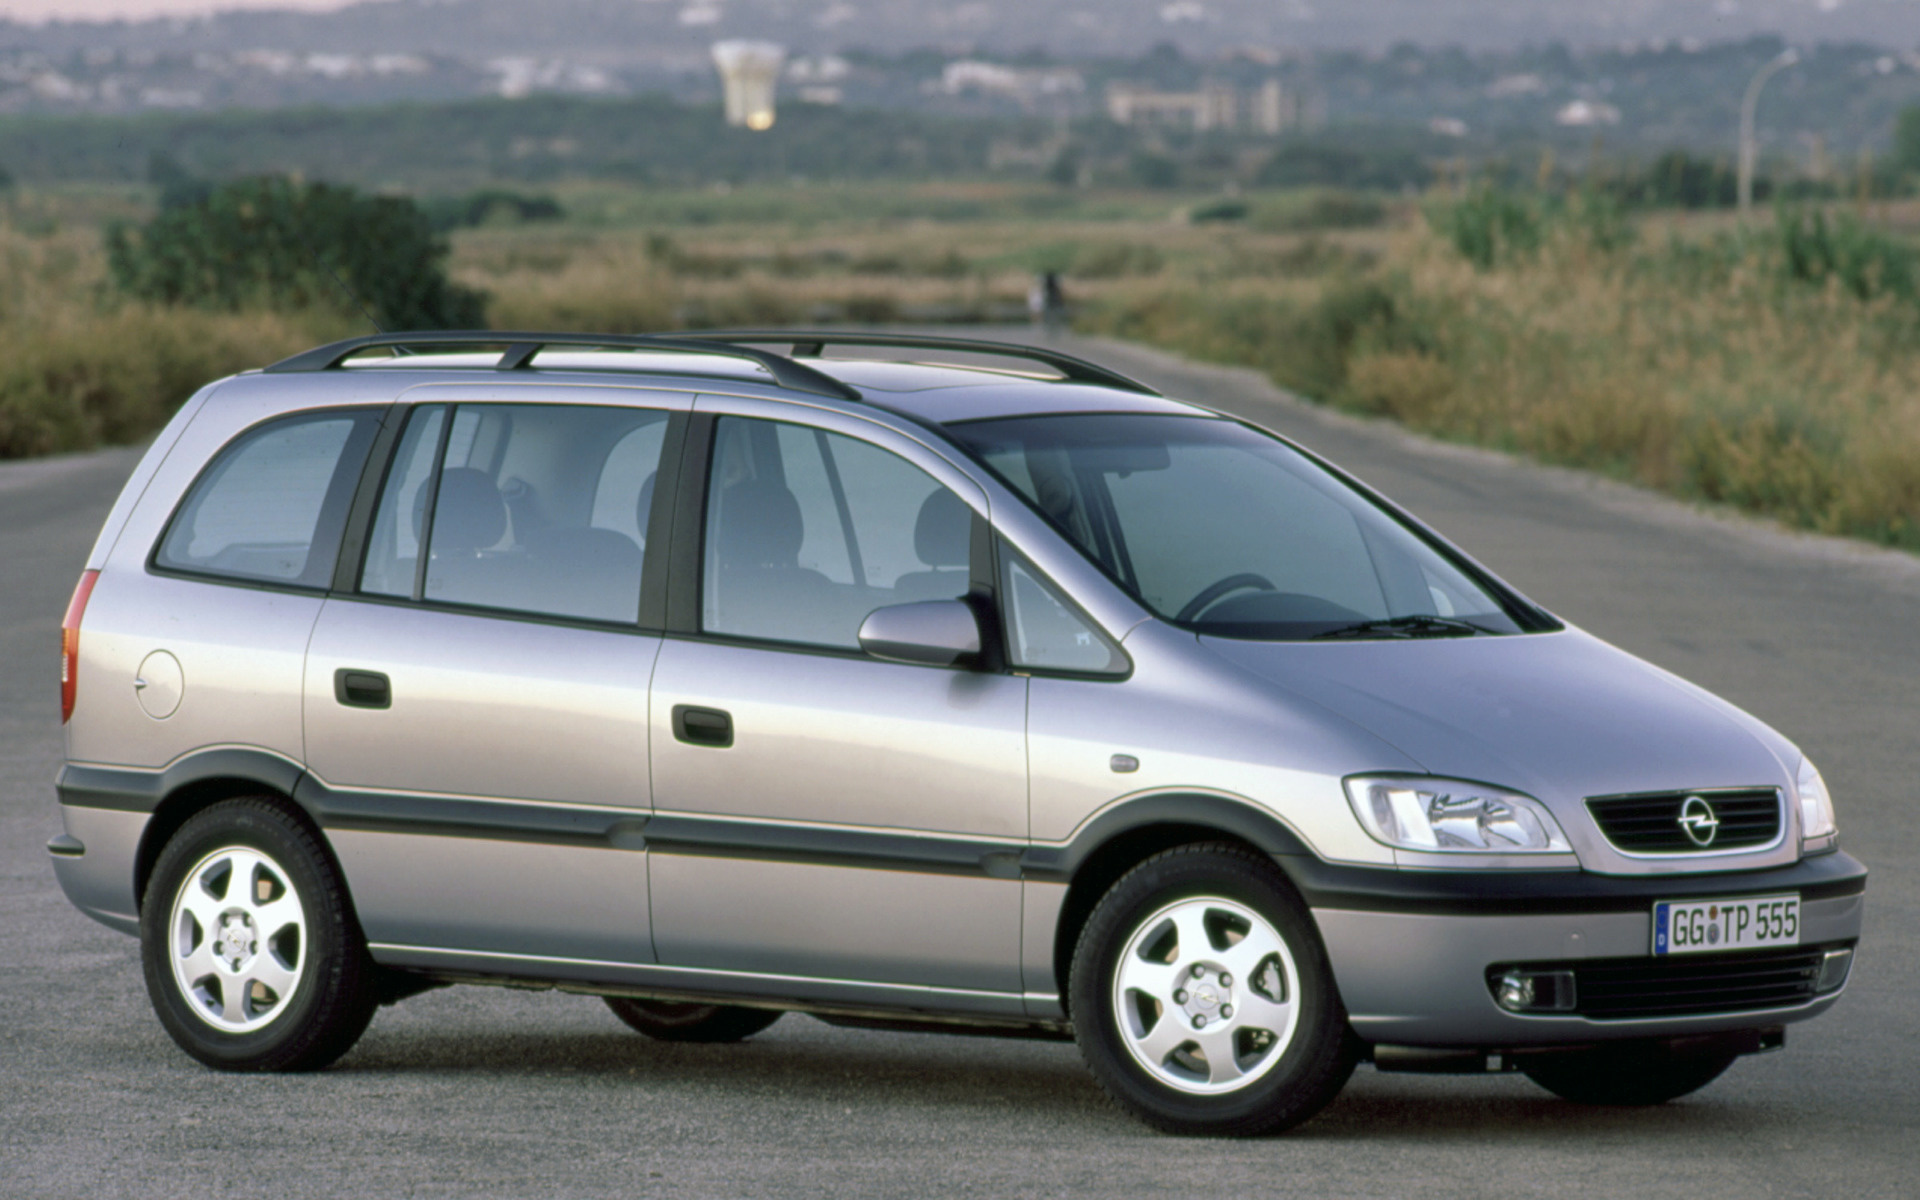 steno bagage corruptie 1999 Opel Zafira - Wallpapers and HD Images | Car Pixel